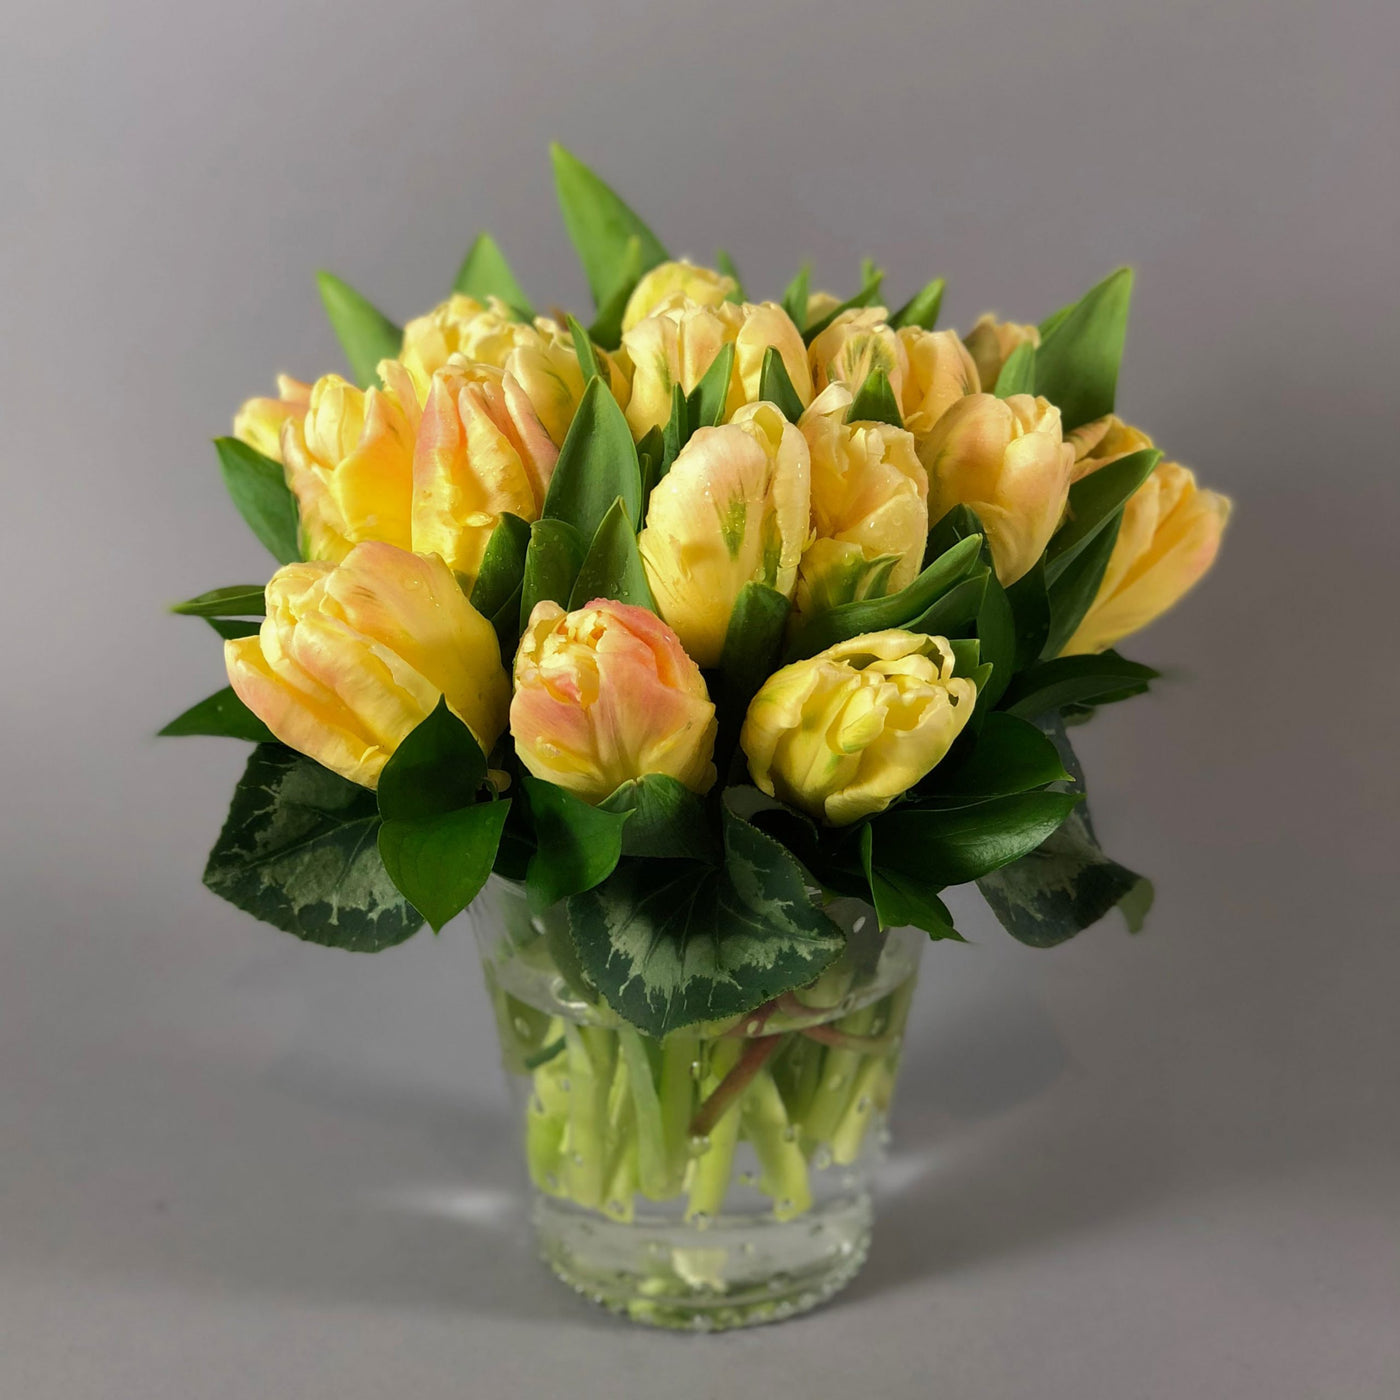 Buttercup Tulips